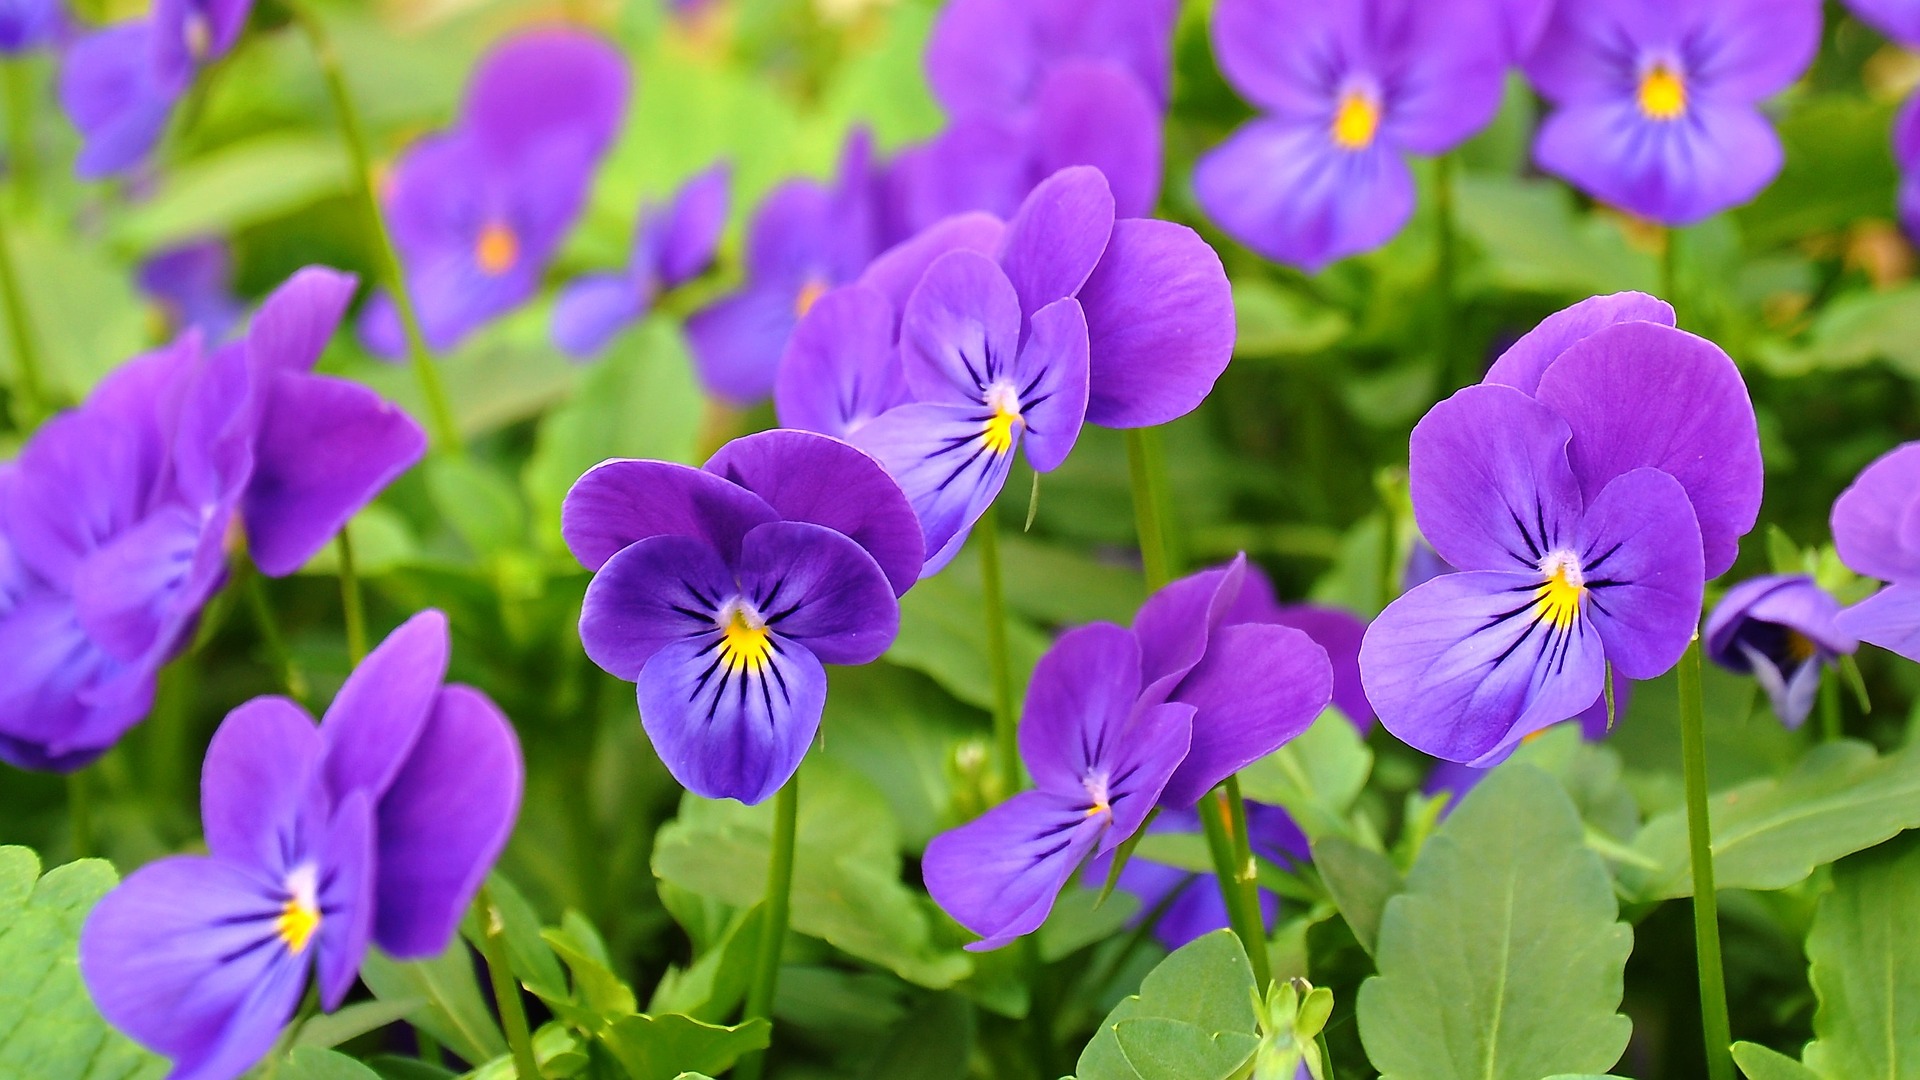 Growing Pansies: How to Plant, Grow, and Care for Pansy Flowers: The ...